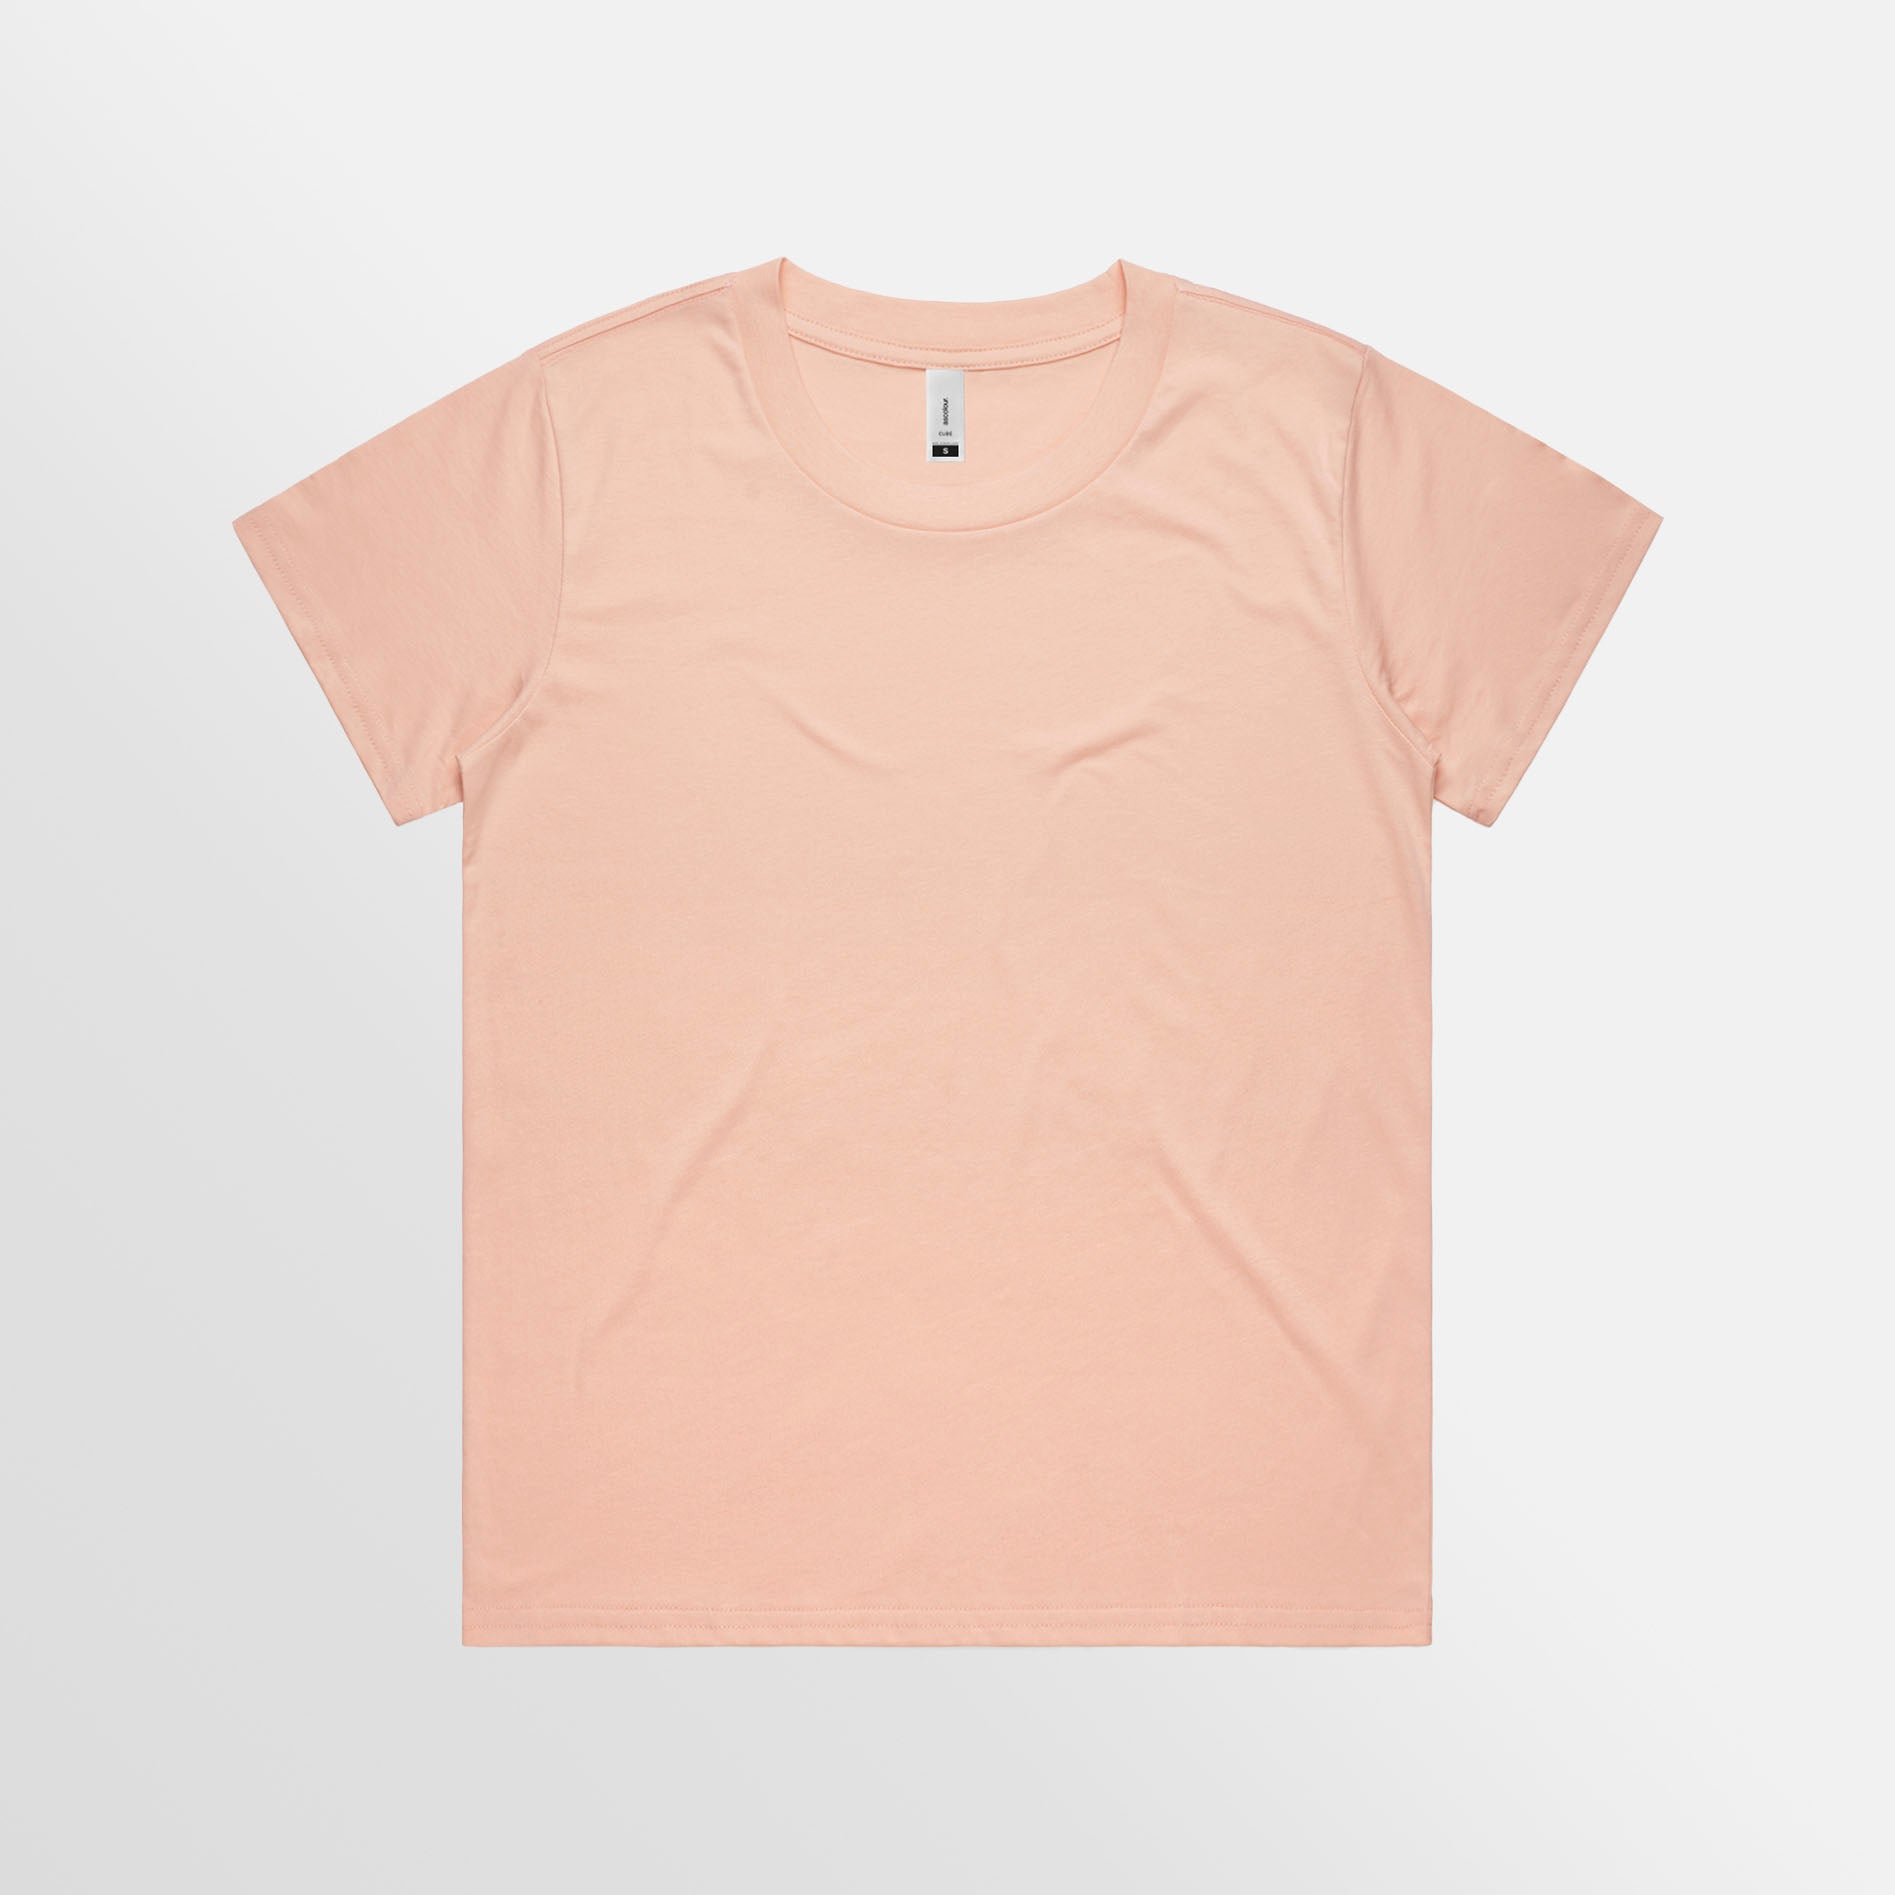 Cube Tee - On Request